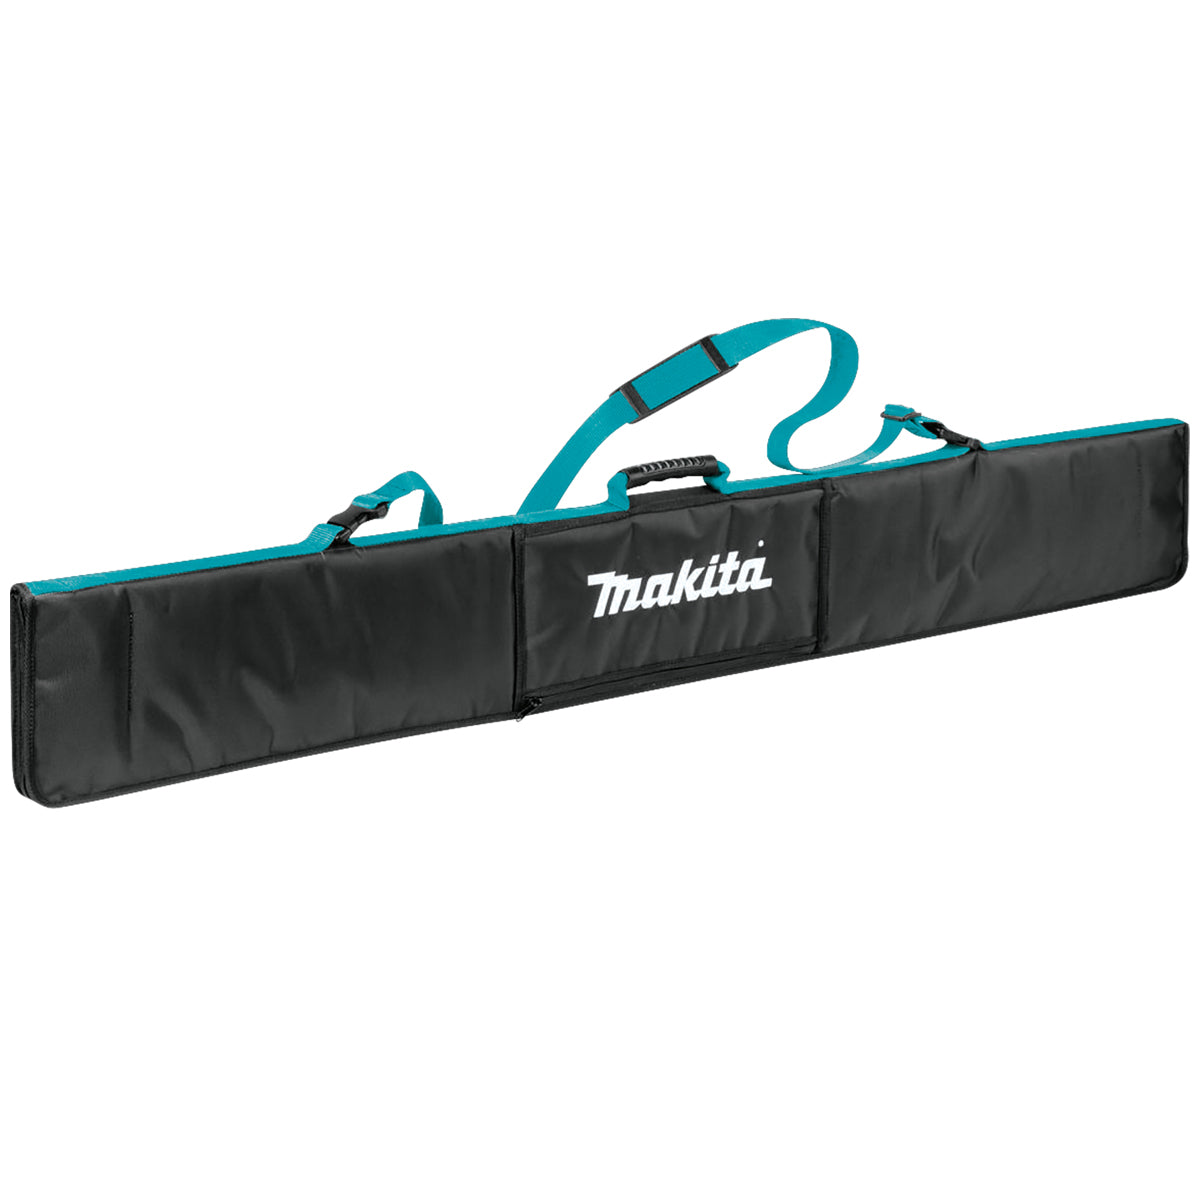 Makita 2 x 1.5m Plunge Saw Guide Rail in Bag with Connector & Clamp